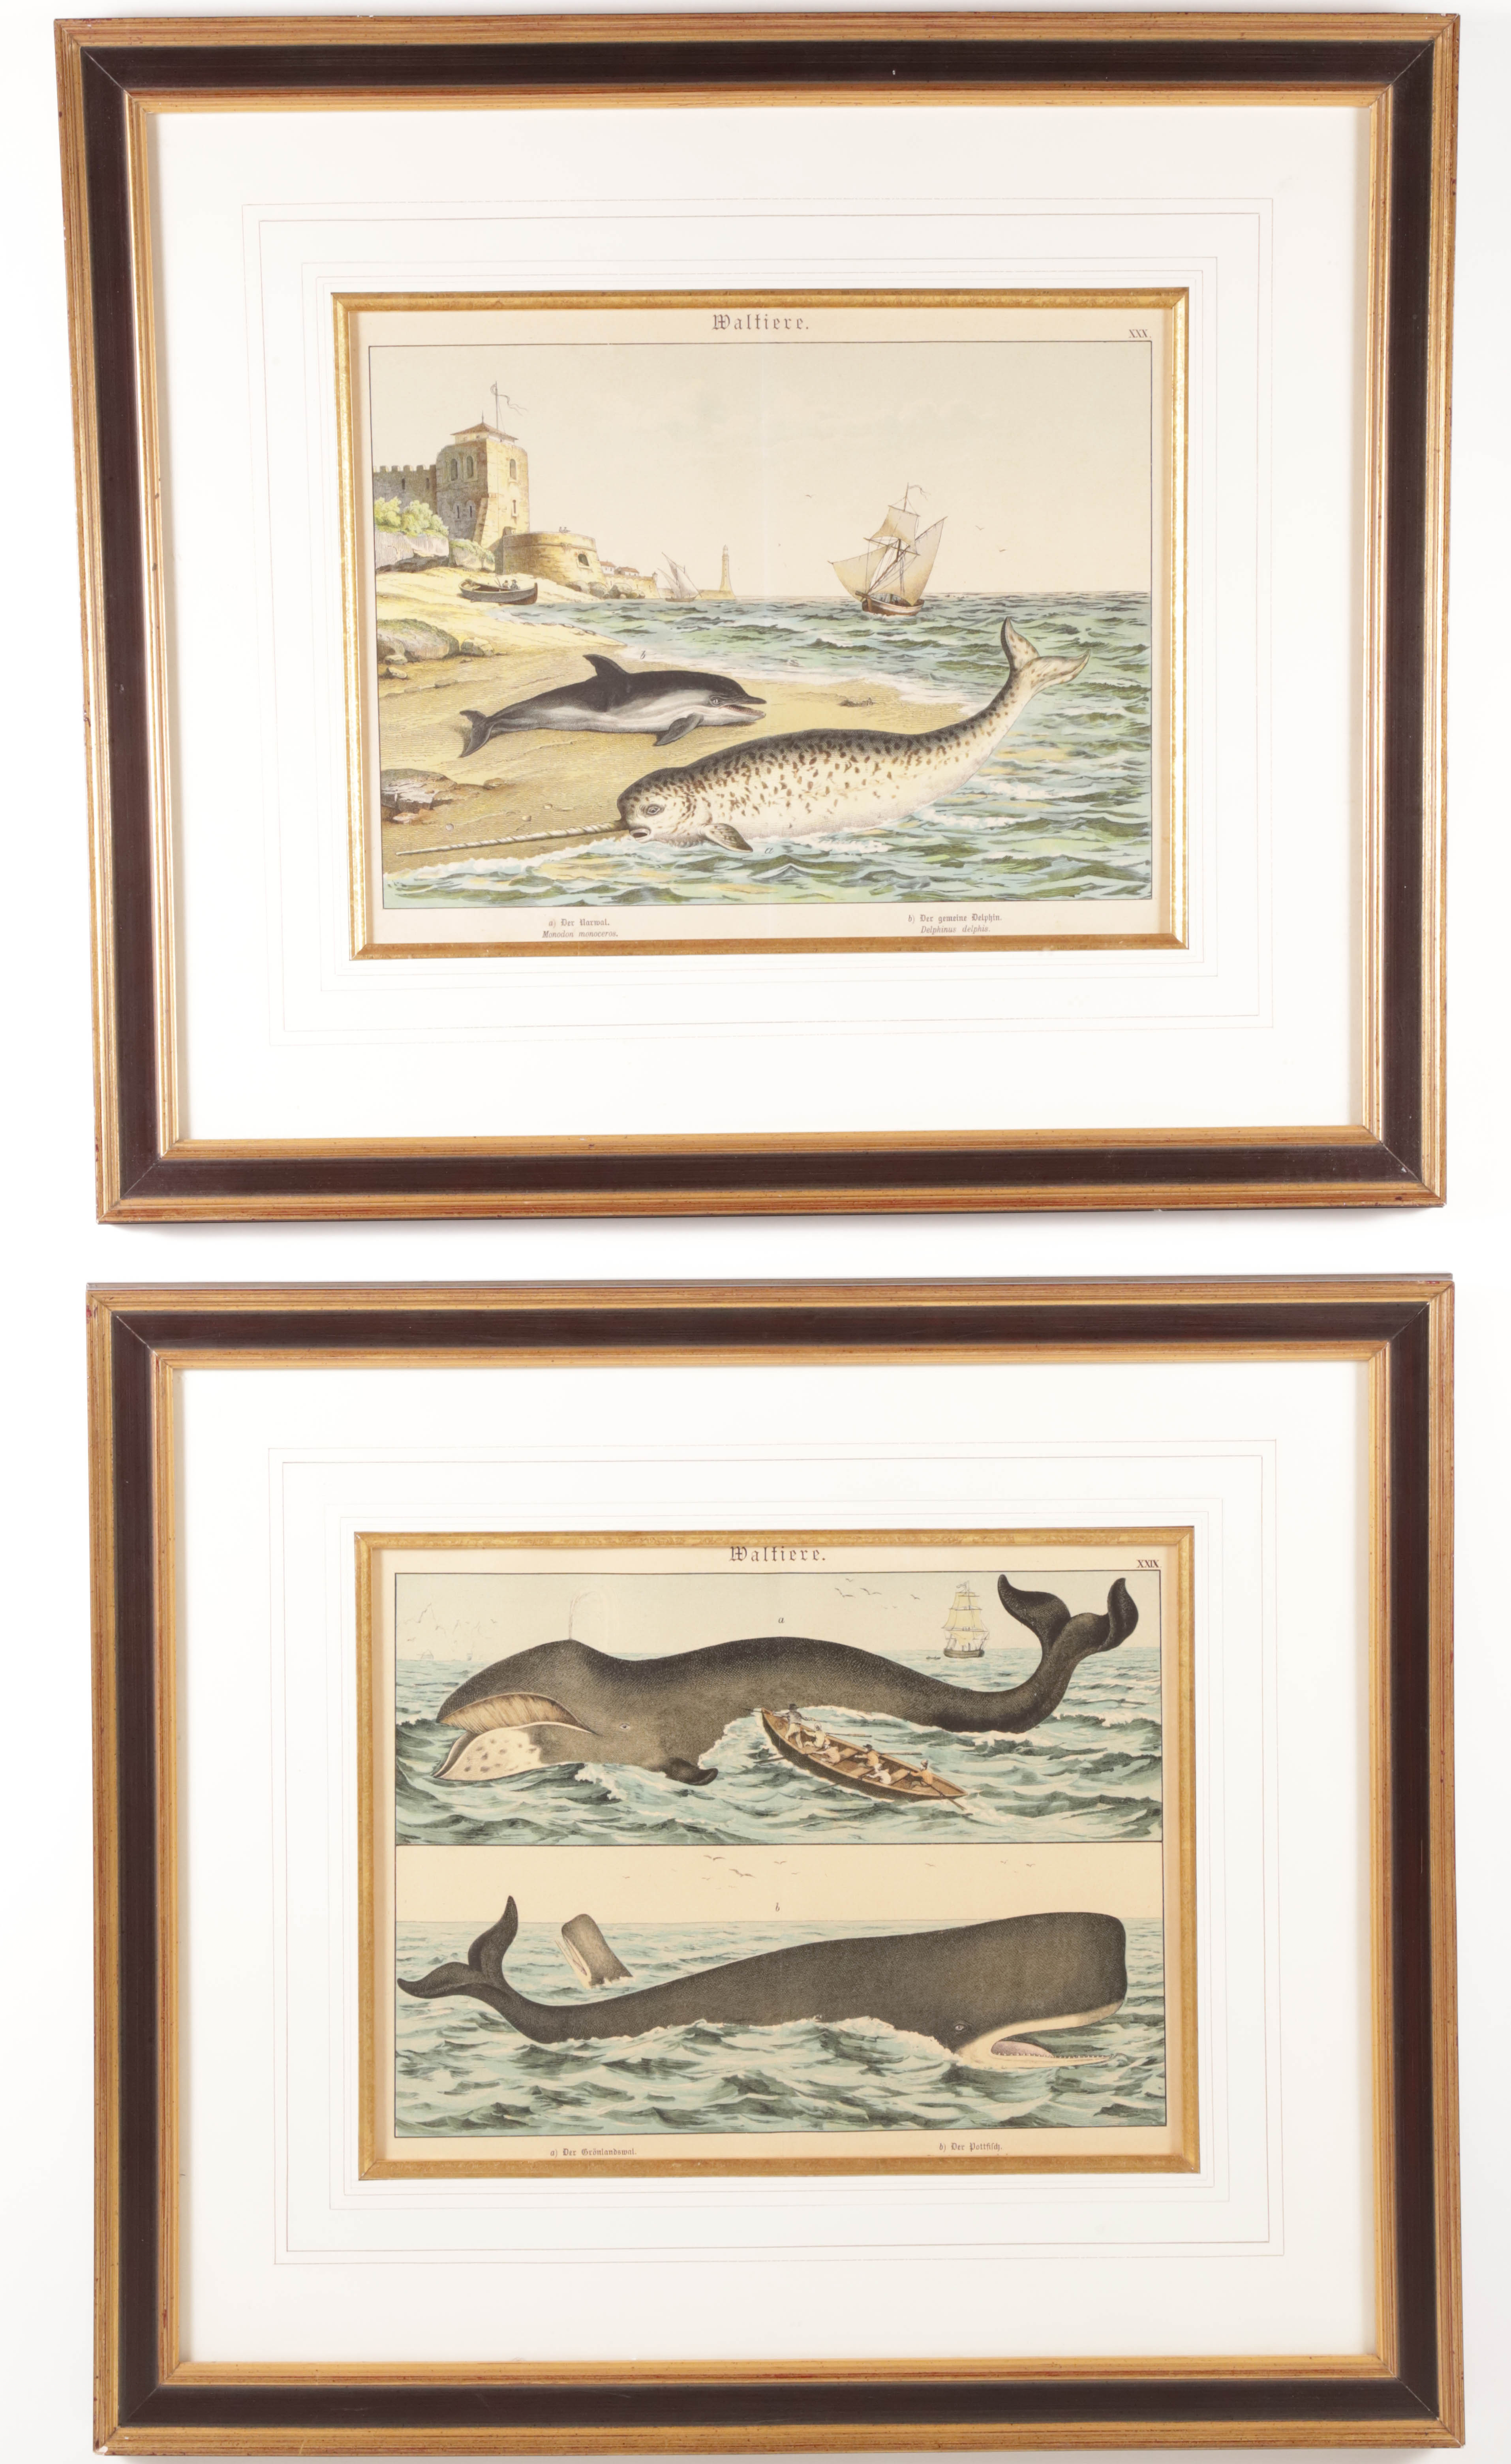 Pair of German Prints of Whales, Narwal and Porpoise, 19th Century